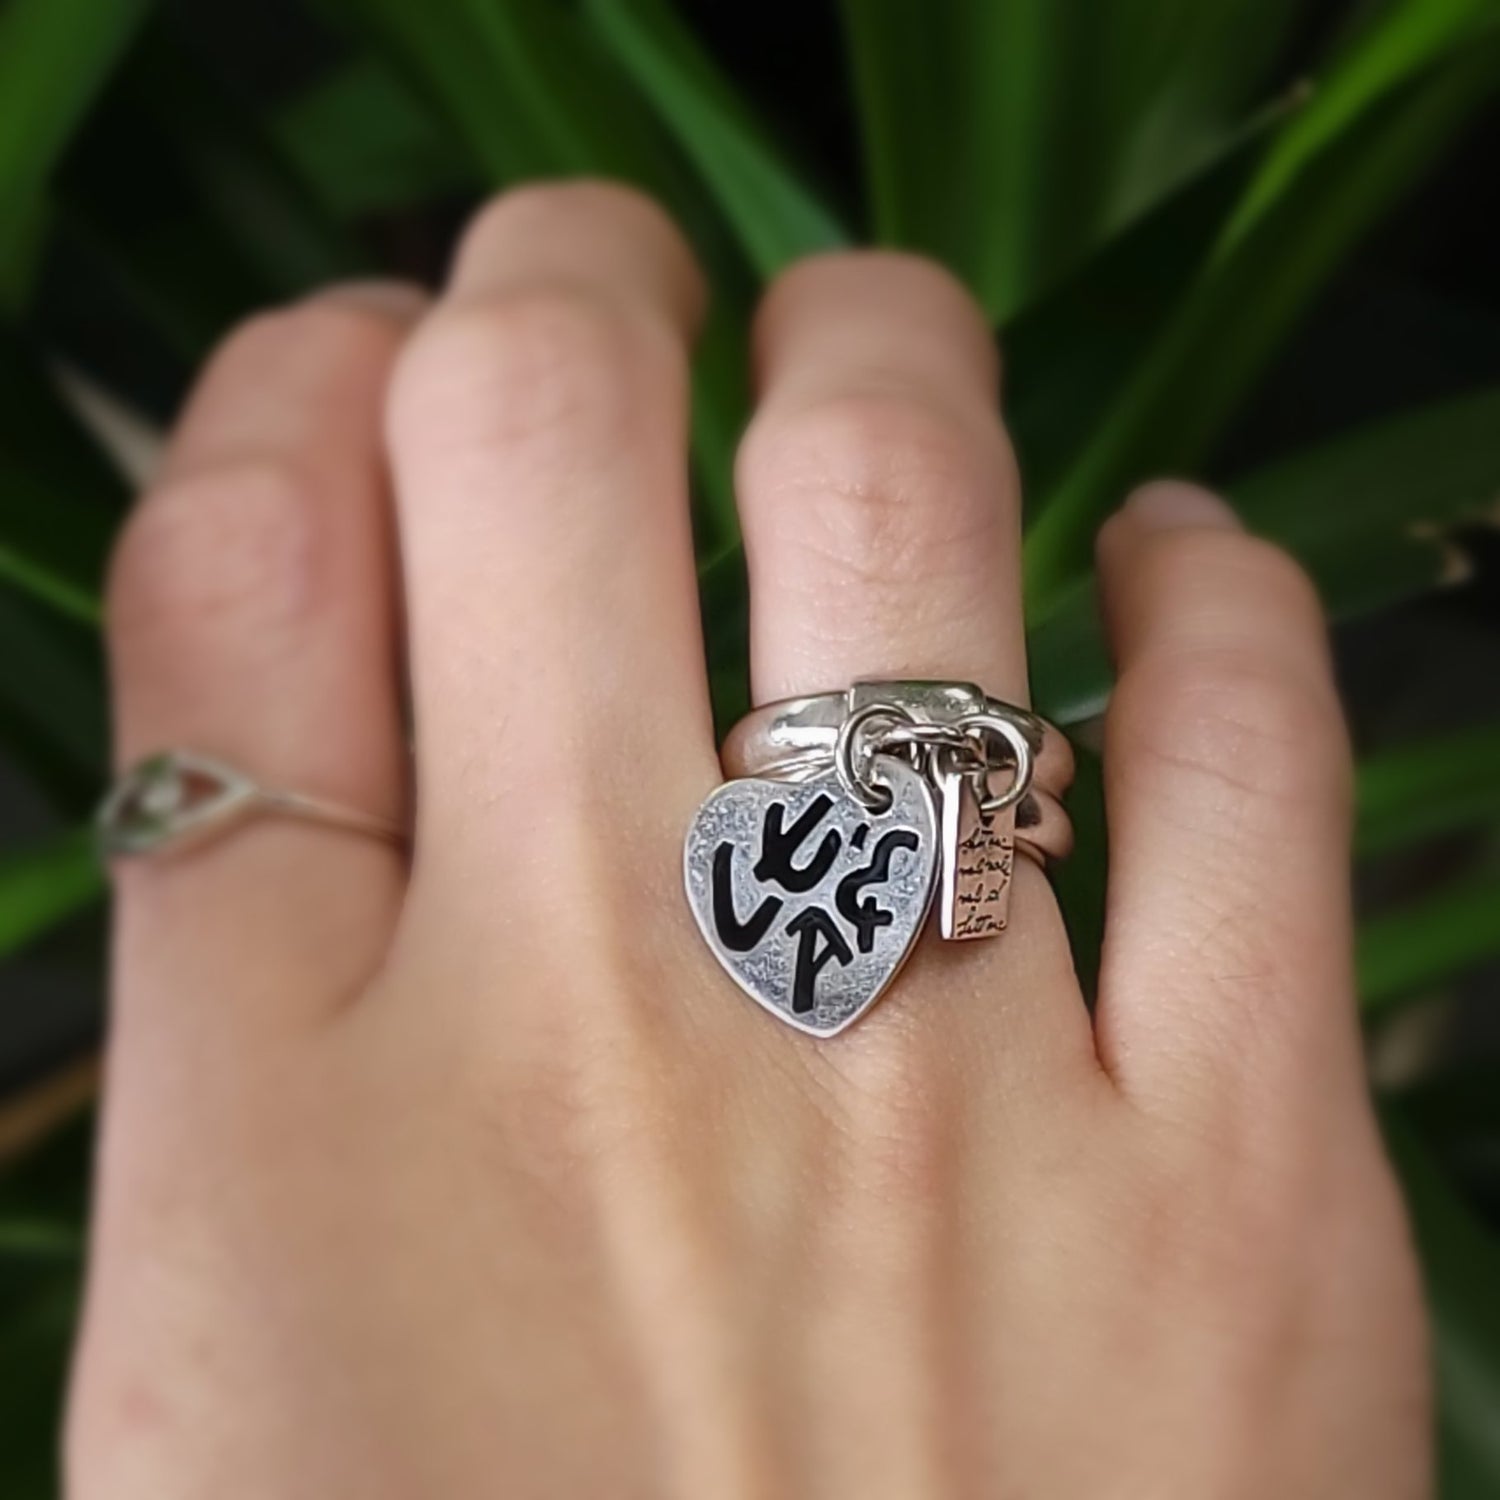 Charm Ring Sterling Silver Band - Elevated Metaphysical